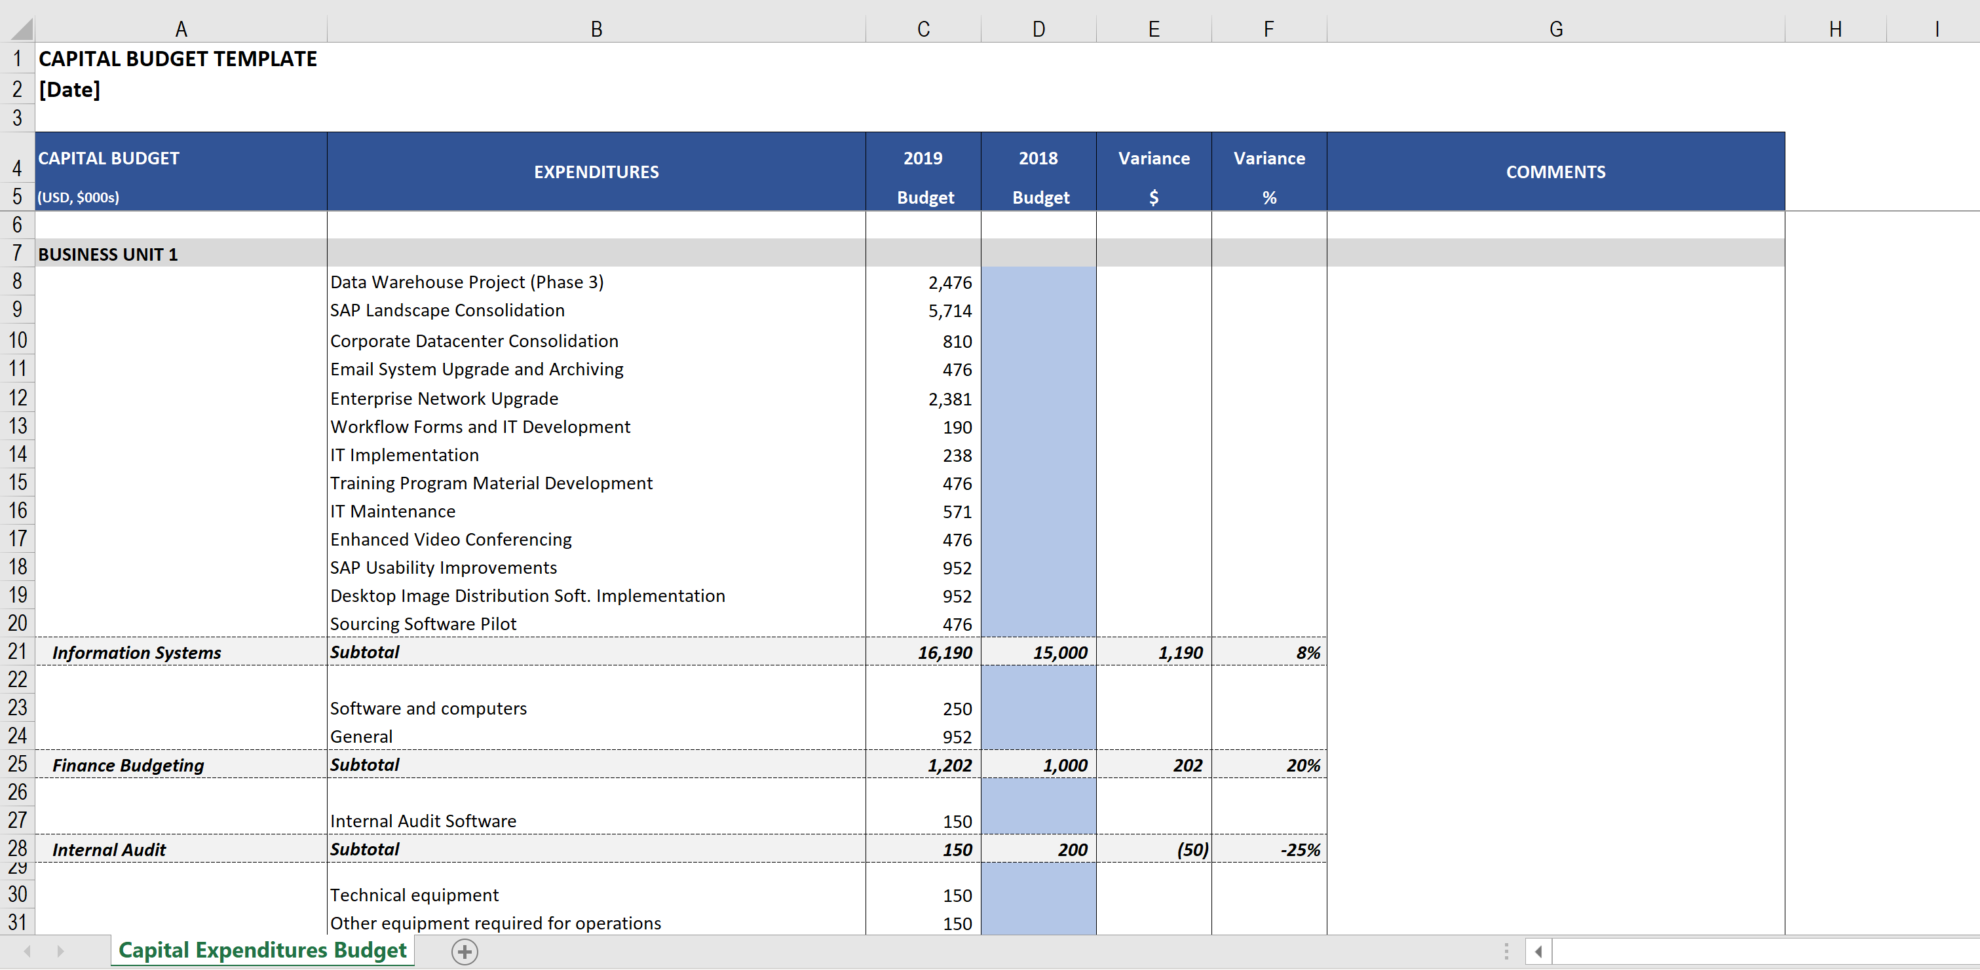 Capital Expenditure Report Template 7706